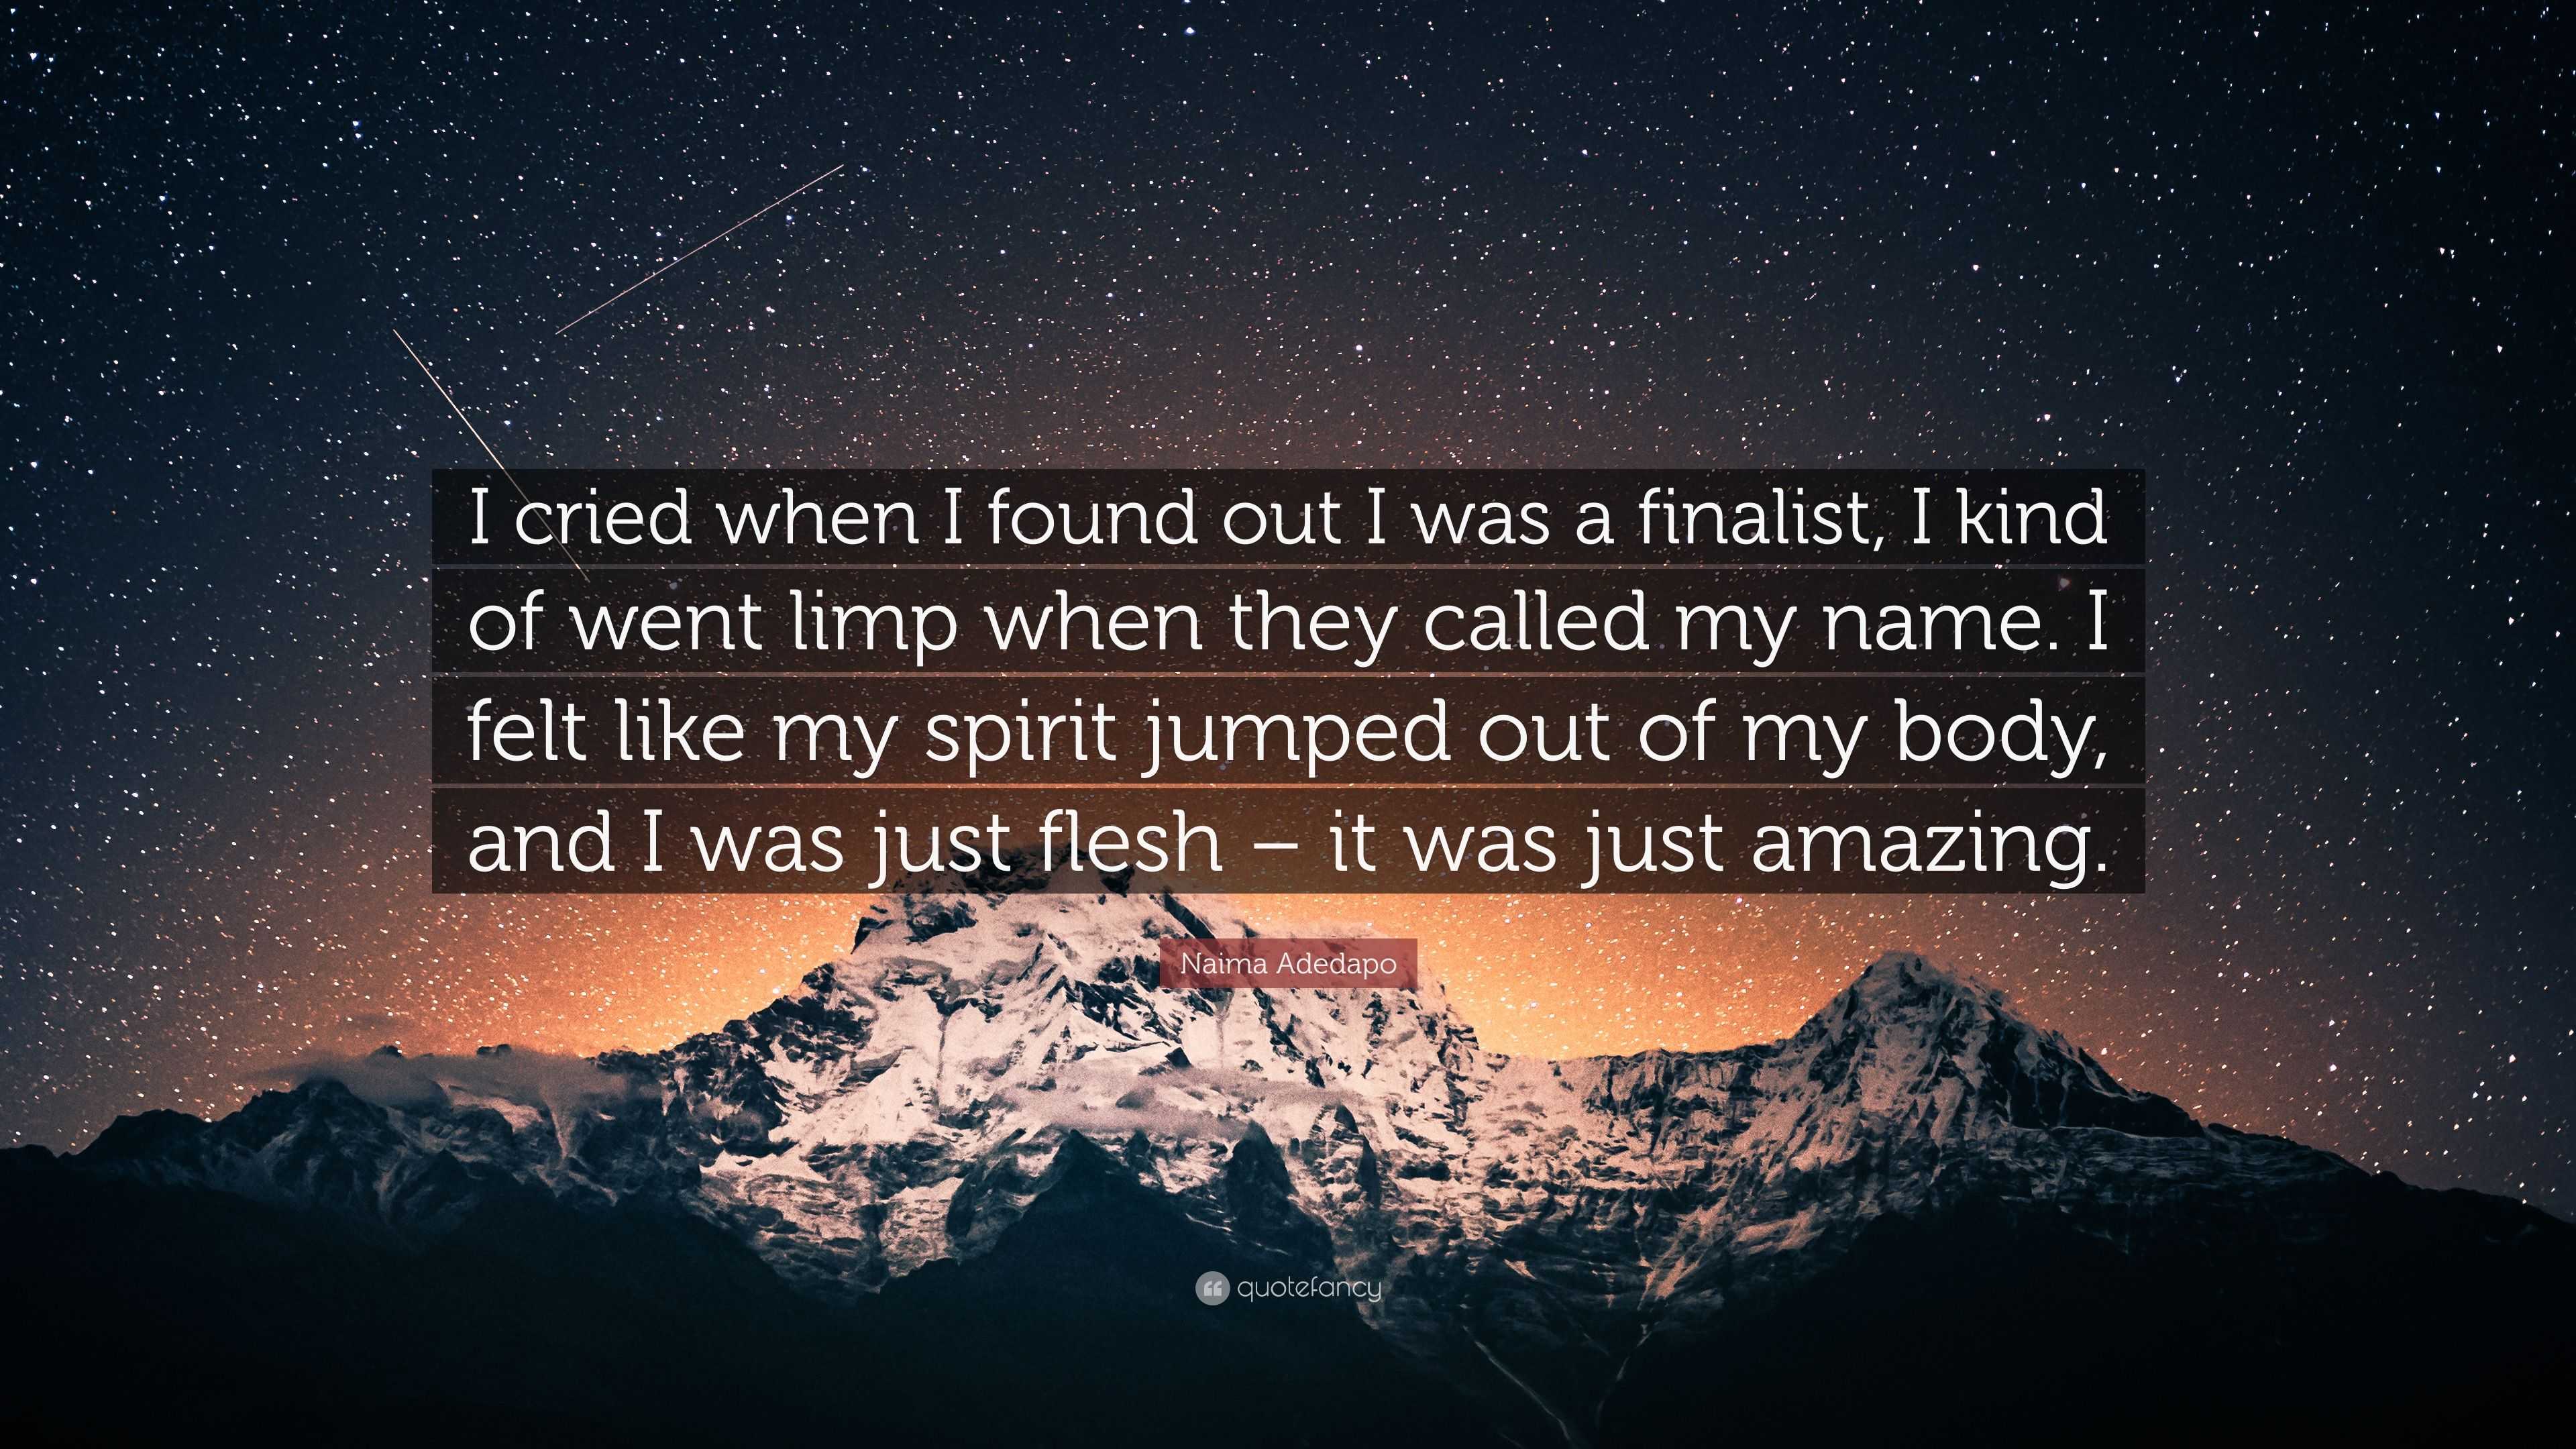 Naima Adedapo Quote: “I cried when I found out I was a finalist, I kind of  went limp when they called my name. I felt like my spirit jumped ou...”